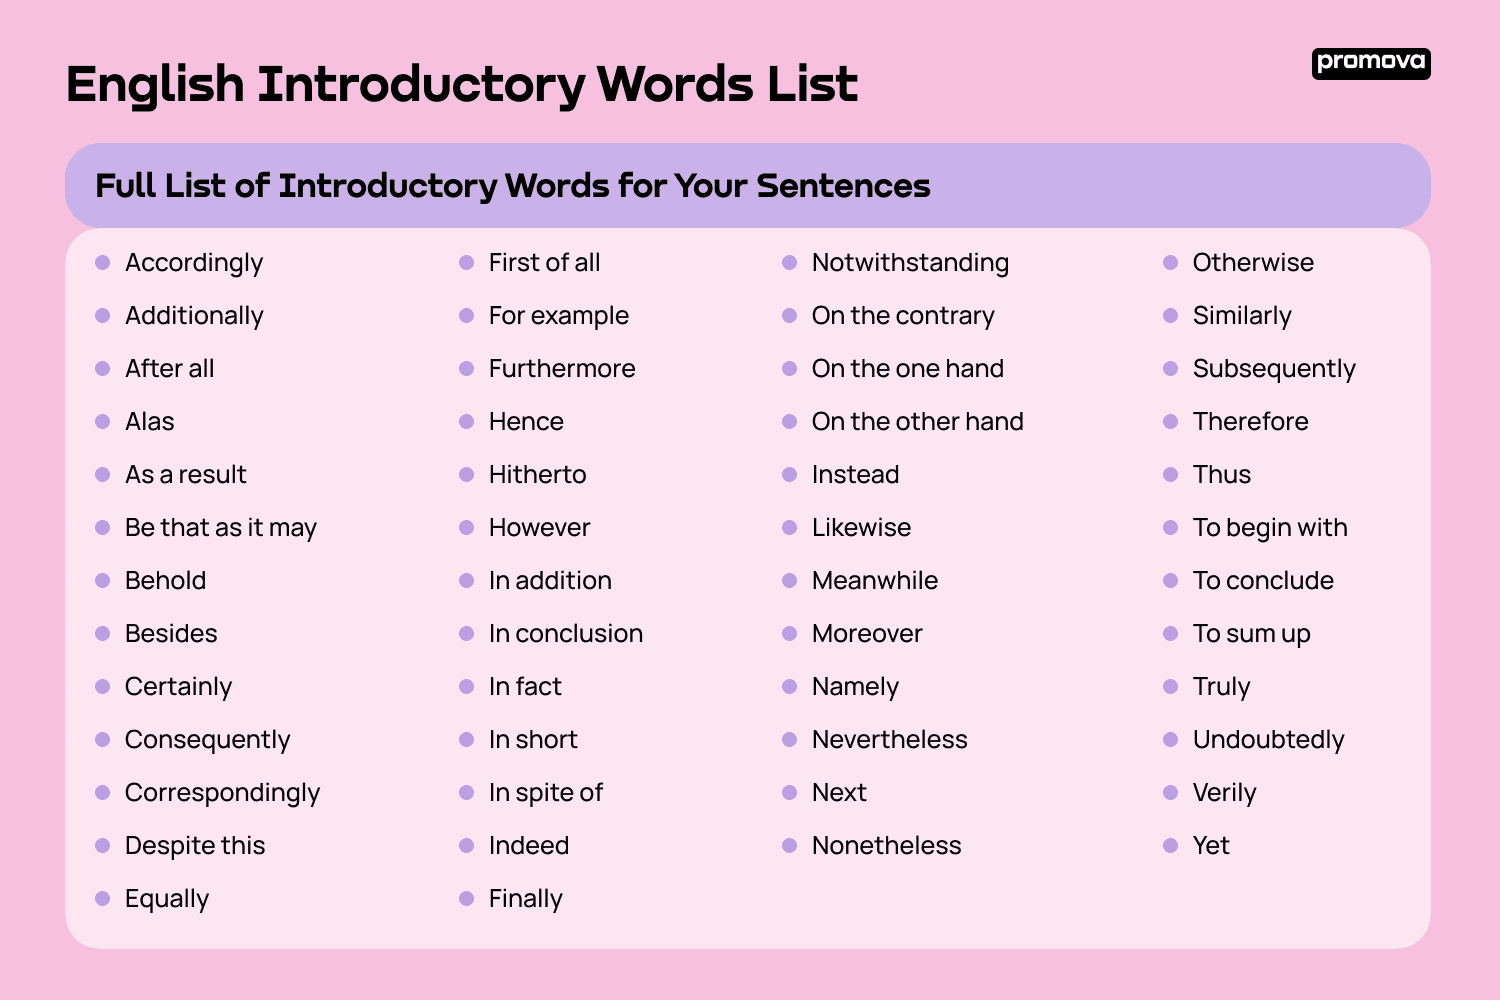 Full List of Introductory Words for Your Sentences